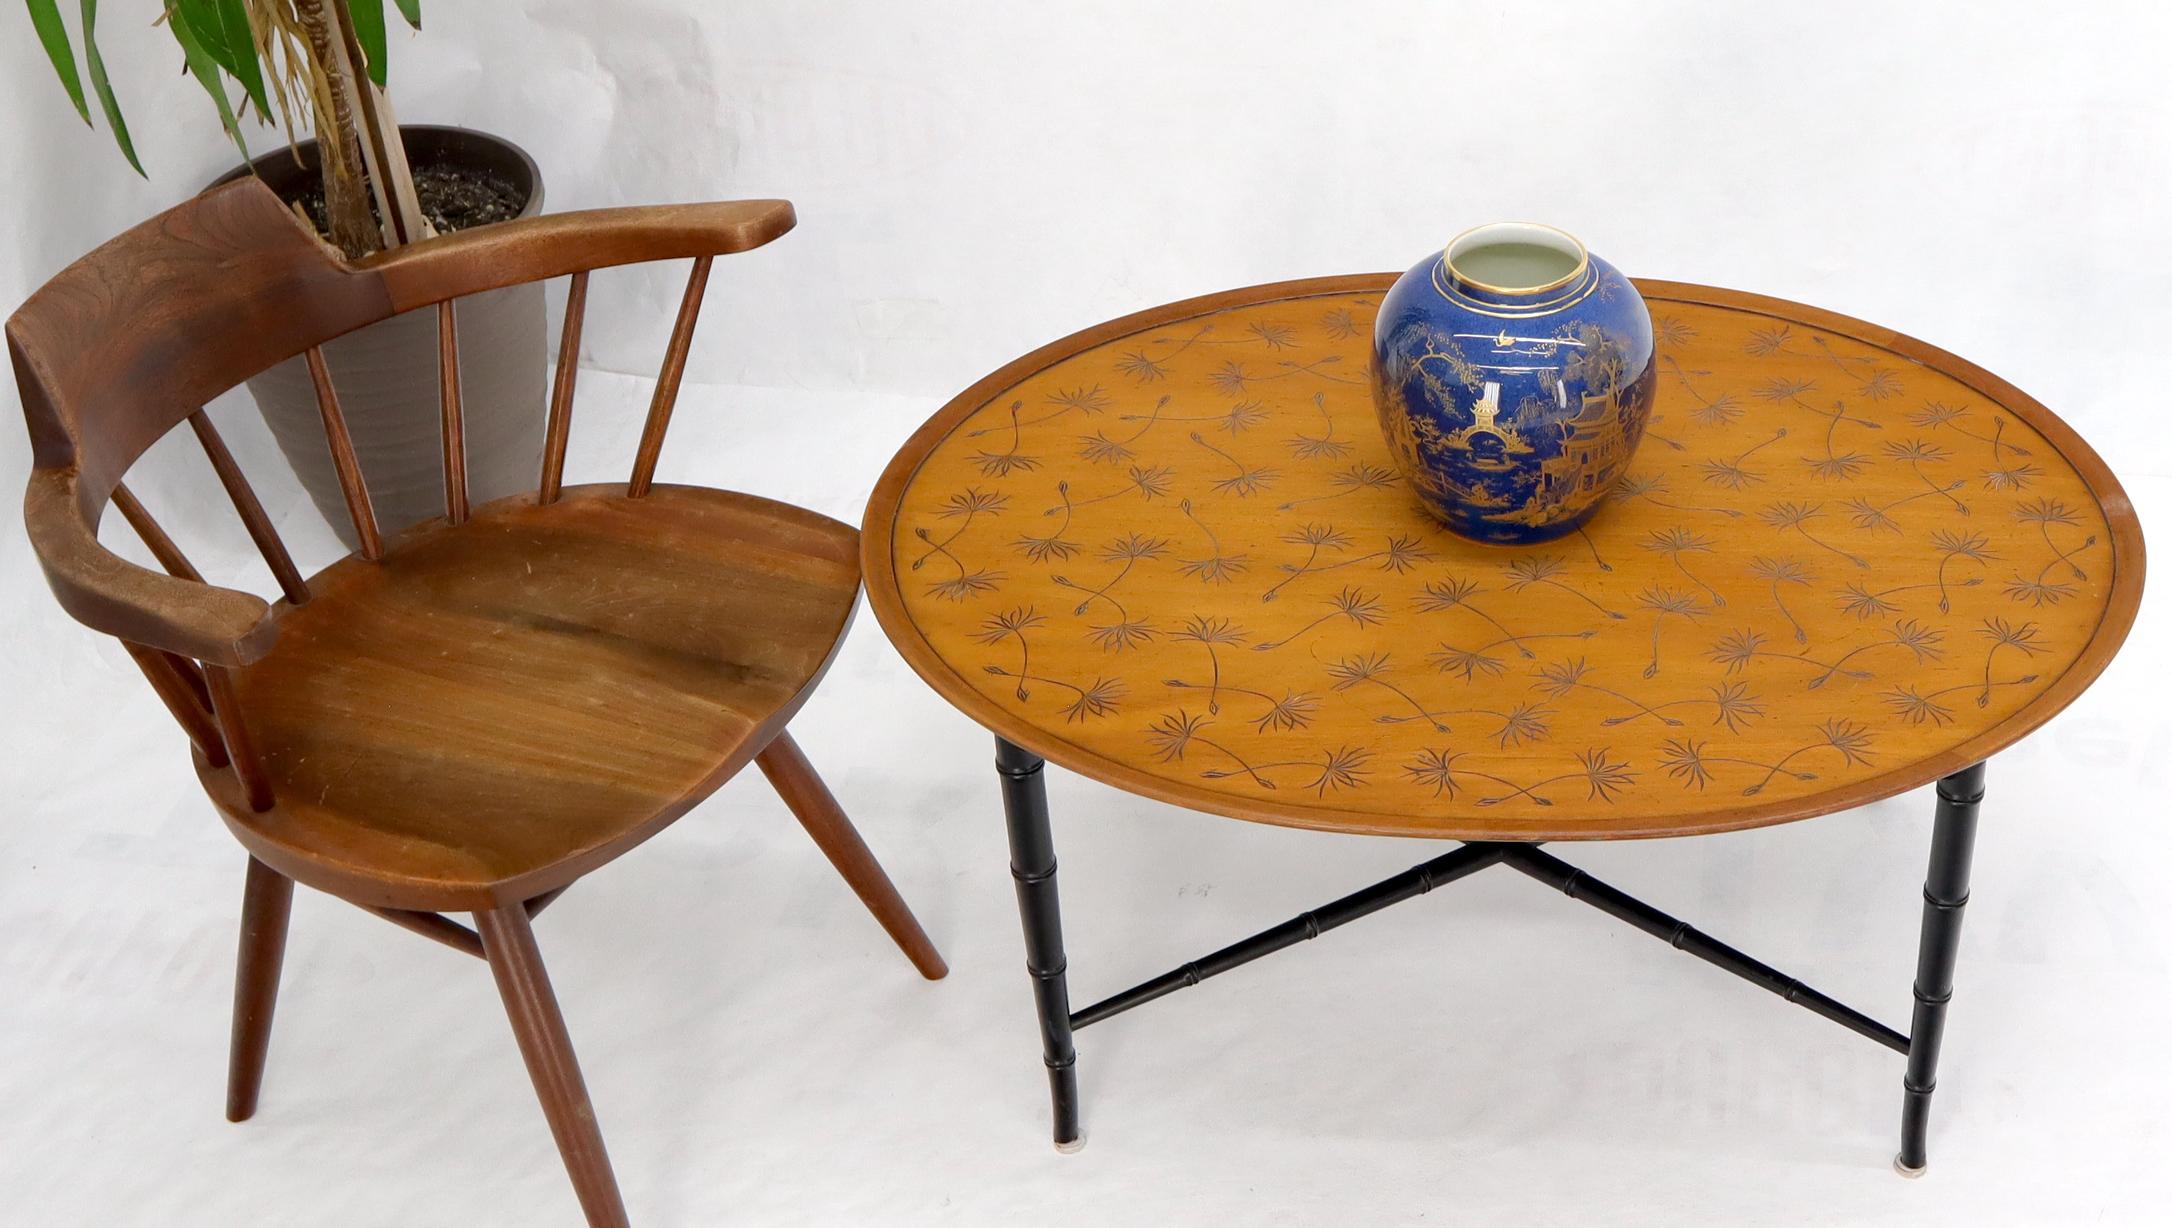 Mid-Century Modern Oval Kittinger Coffee Table Faux Bamboo Tapered Legs Incised Leafs Design on Top For Sale